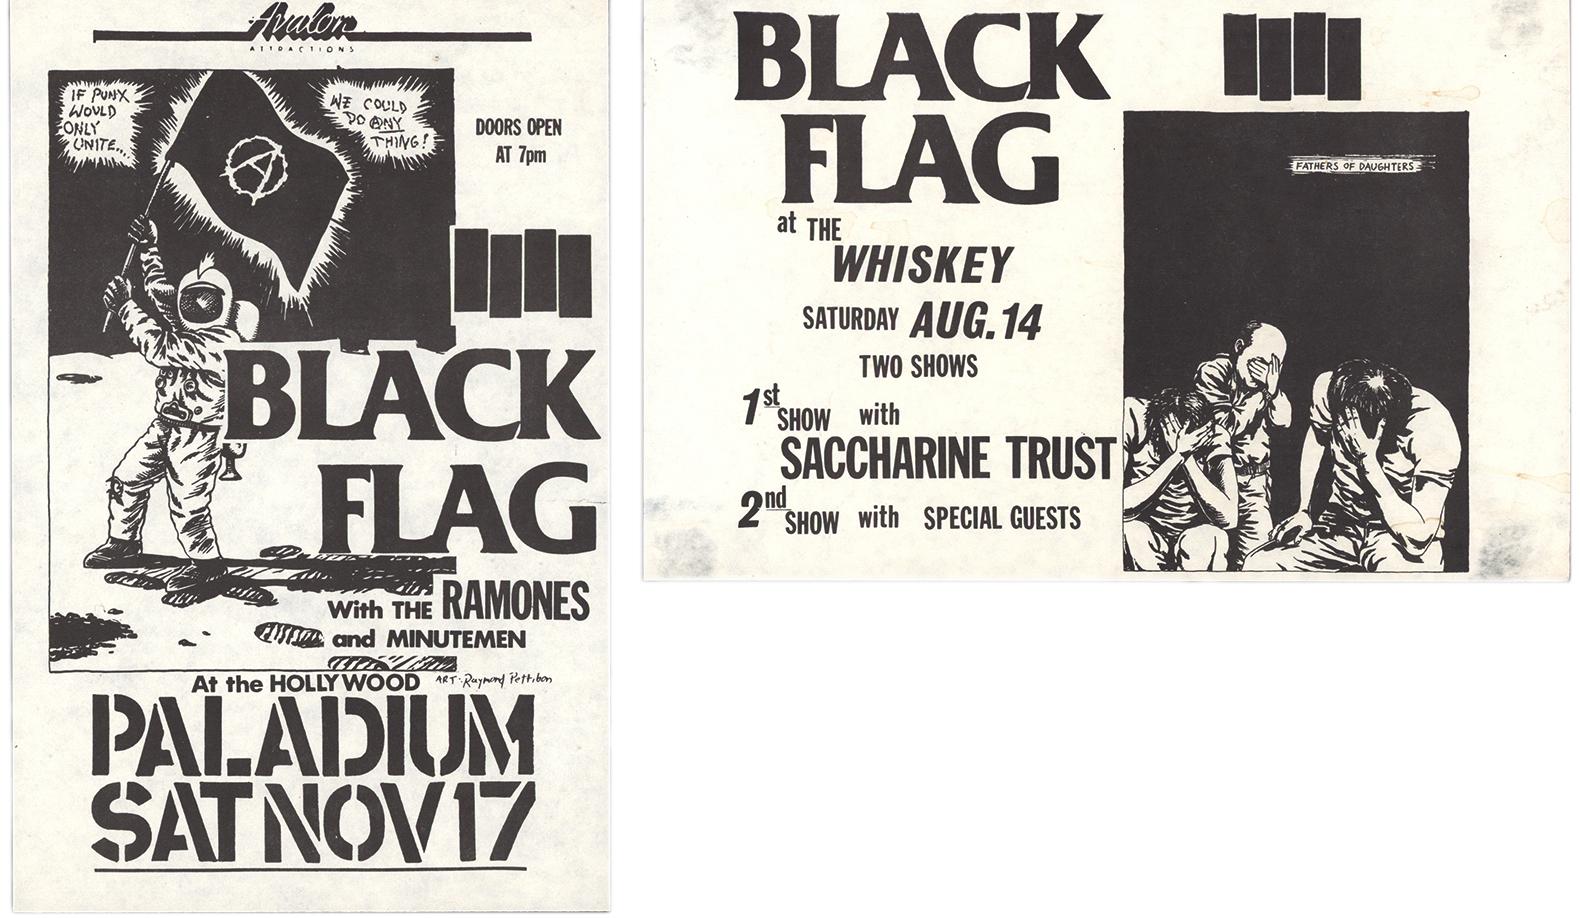 Raymond Pettibon Black Flag 1982/1984: 
A set of 2 rare Raymond Pettibon illustrated Black Flag punk flyers. Published on the occasion of:
 
Black Flag & Saccharine Trust at the Whiskey, August 14th, 1982; and Black Flag with the Ramones & Minutemen